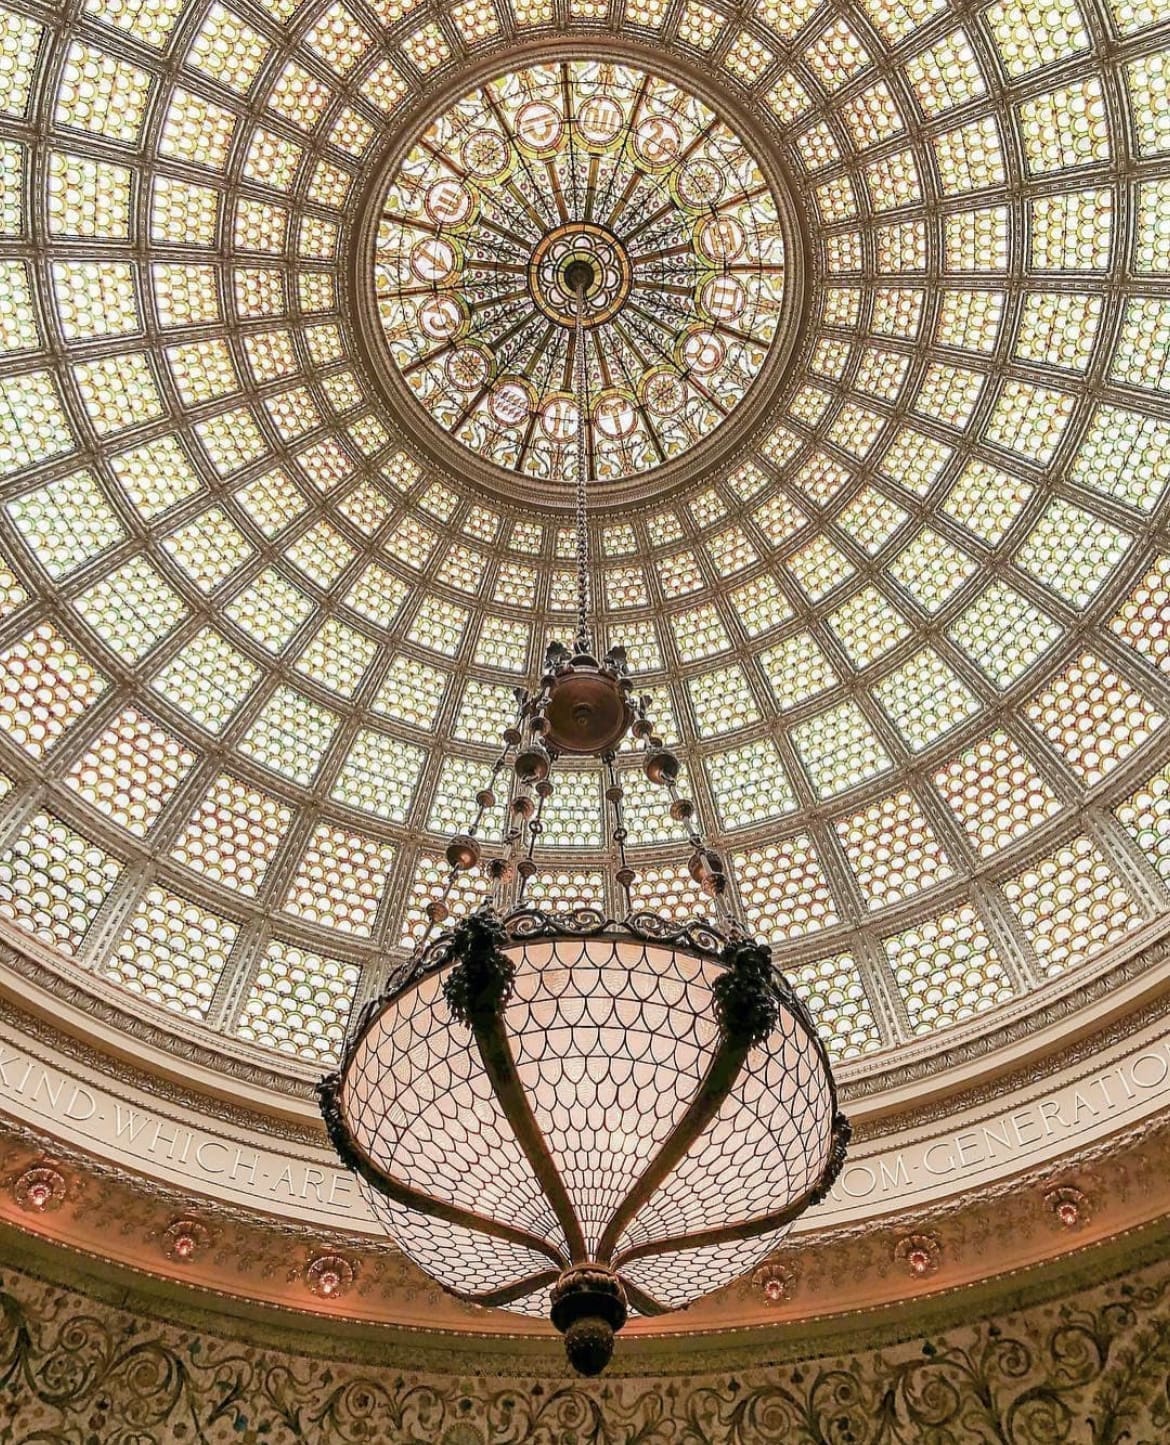 The Chicago Cultural Center